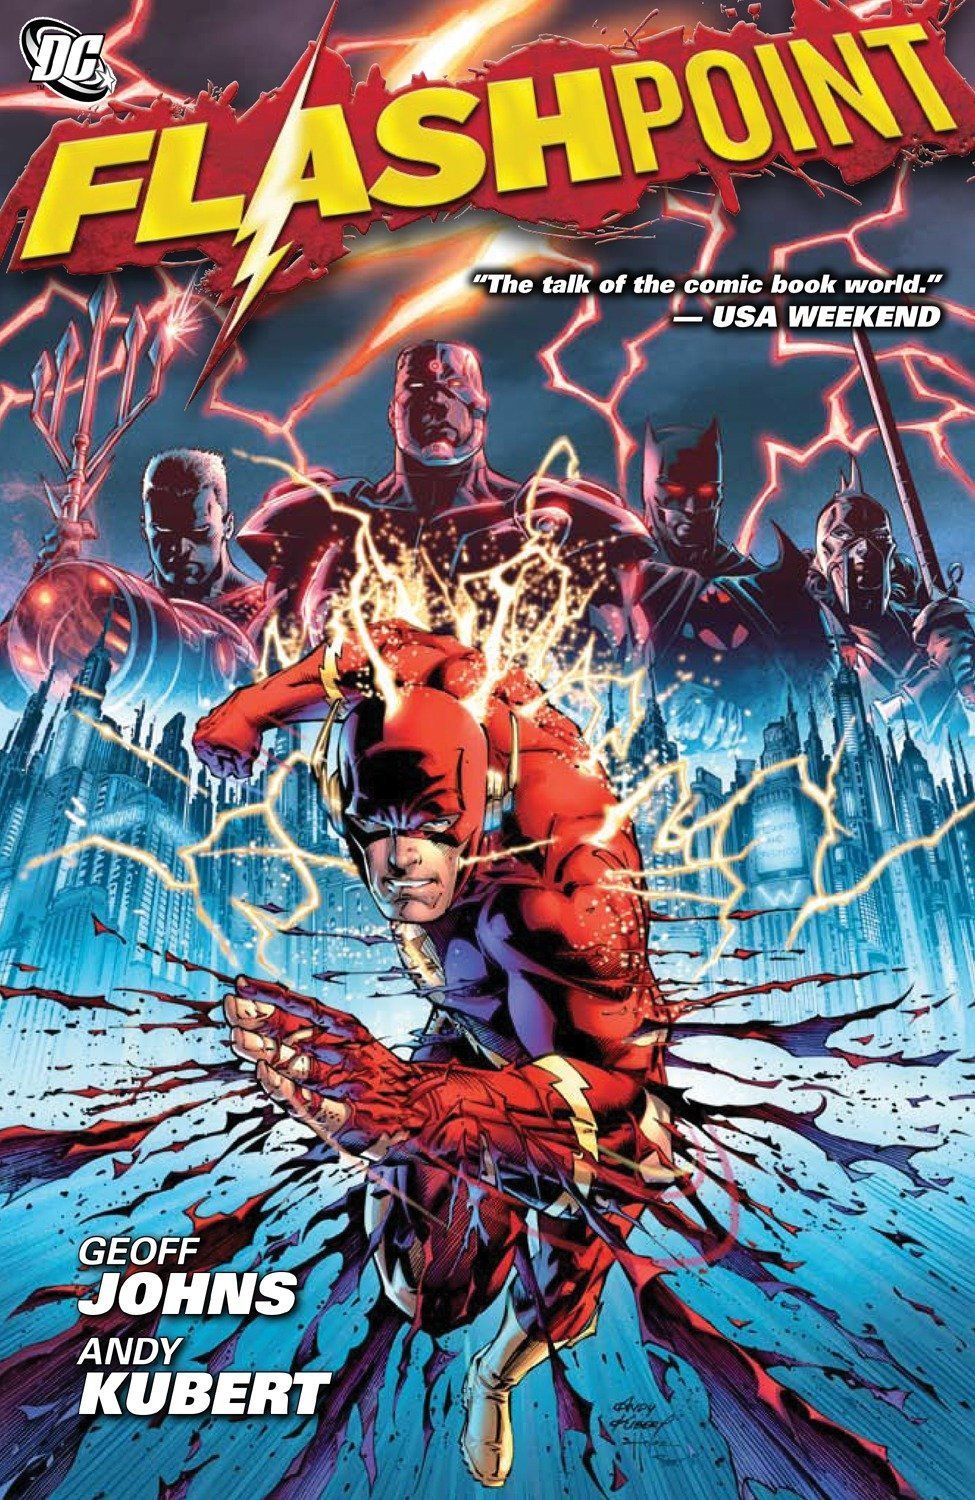 <p><strong>$11.99</strong></p><p>It’s hard to think of a comic book story more infamous than <em>Flashpoint</em>. Originally, Geoff Johns and artist Andy Kubert intended <em>Flashpoint </em>to be a stand-alone Flash story, about the unintended consequences of Barry’s decision to go back in time and rescue his mother. But when DC Editorial decided that it was time for yet another universe-wide reboot, they made The Flash the culprit. As a result, Barry’s trip to the past creates not just problems for himself, but a radically different DC Universe, one in which Thomas Wayne became Batman after the death of his young son Bruce, and in which an emaciated Superman lives hidden in a government lab. Even when Barry finds a way back to the main universe, he finds it completely changed, launching the New 52 continuity. </p><p>For many reasons, the New 52 was a flop, and DC’s continuity has been largely reset to its pre-<em>Flashpoint</em> status quo. But the failed expectations placed upon the series by editorial shouldn’t take away from what remains a pretty exciting Flash story. Forced to encounter a world made much worse by his actions, Barry gains a greater awareness of the cost of his actions. In the face of a world better for him, but not for anyone else, Barry sacrifices the life he wants—a sacrifice almost as great as the one he made in <em>Crisis on Infinite Earths</em>. So potent is the <em>Flashpoint </em>story that it has been reused not only in the <em>Flash</em> TV show, but it’s also the major inspiration for <em>The Flash</em> movie.</p>